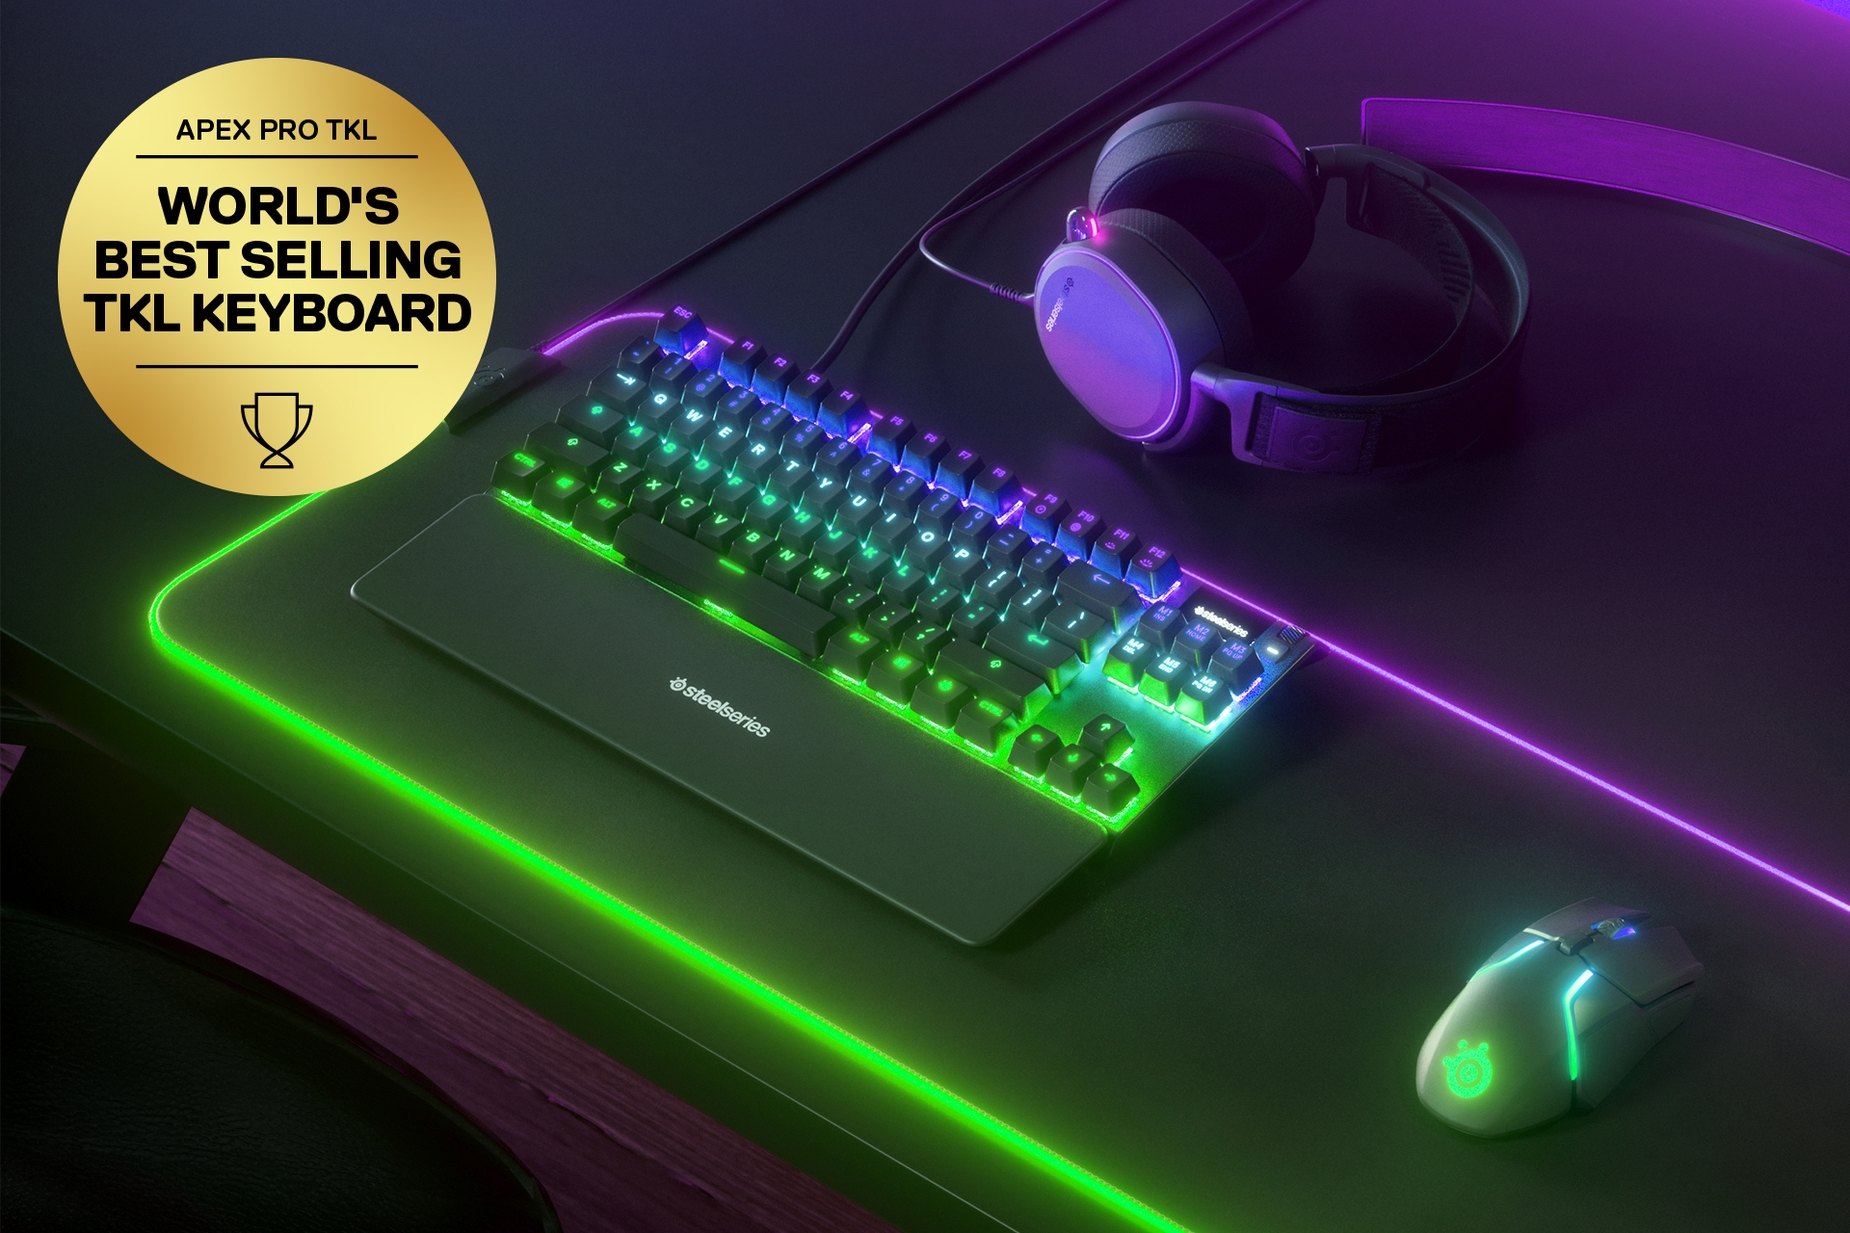 
 Nordic - Apex Pro TKL gaming keyboard on a desk with a gaming mouse, both on top of a large mousepad and a SteelSeries gaming headset next to them. Keyboard has gold award floating next to it with text "World's best selling TKL Keyboard".
 